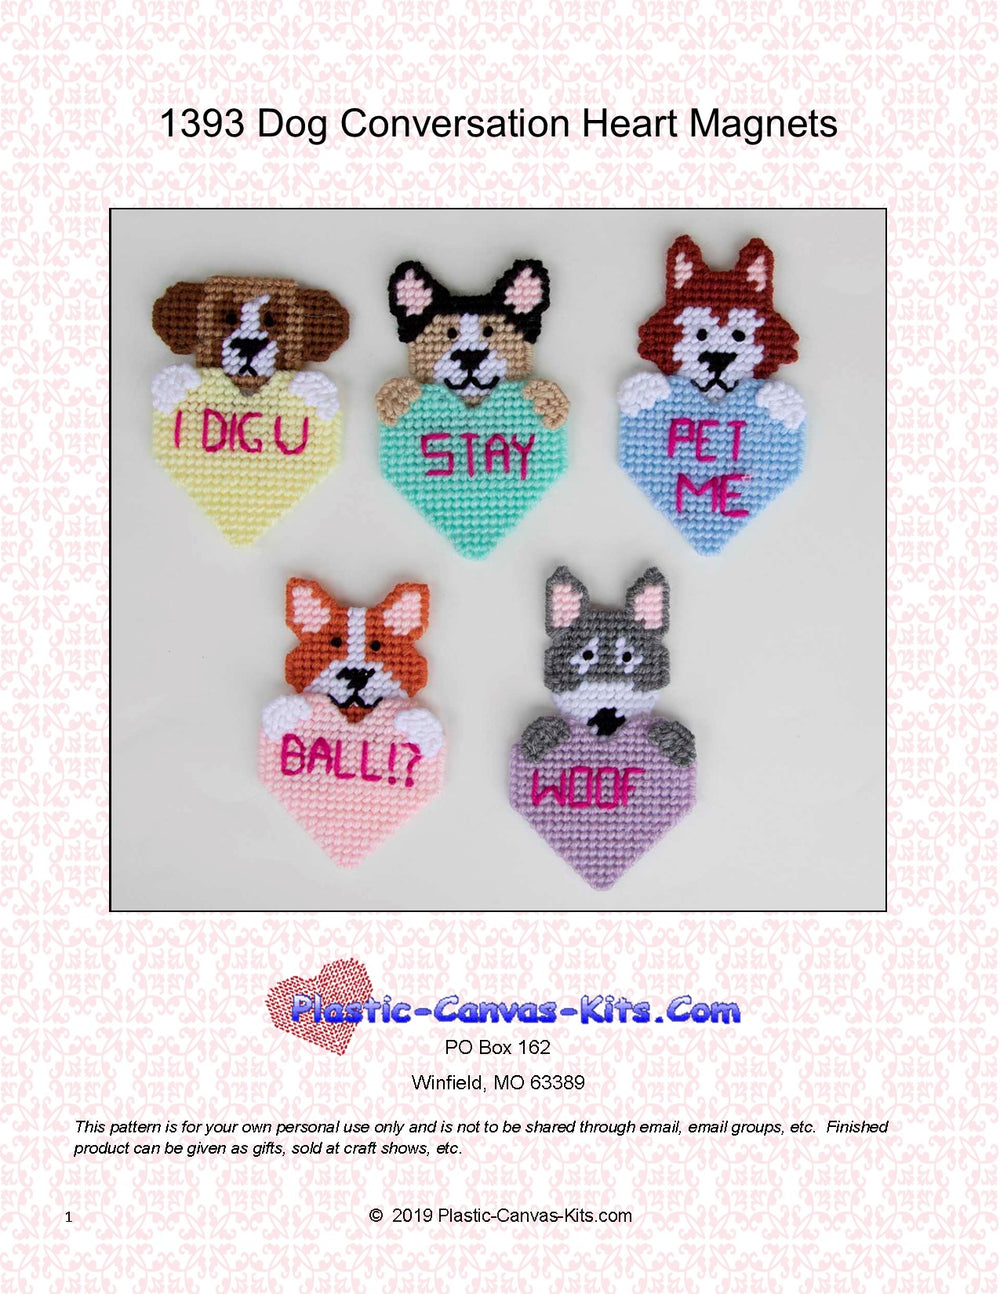 Dogs and Valentine's Day Conversation Hearts Magnets